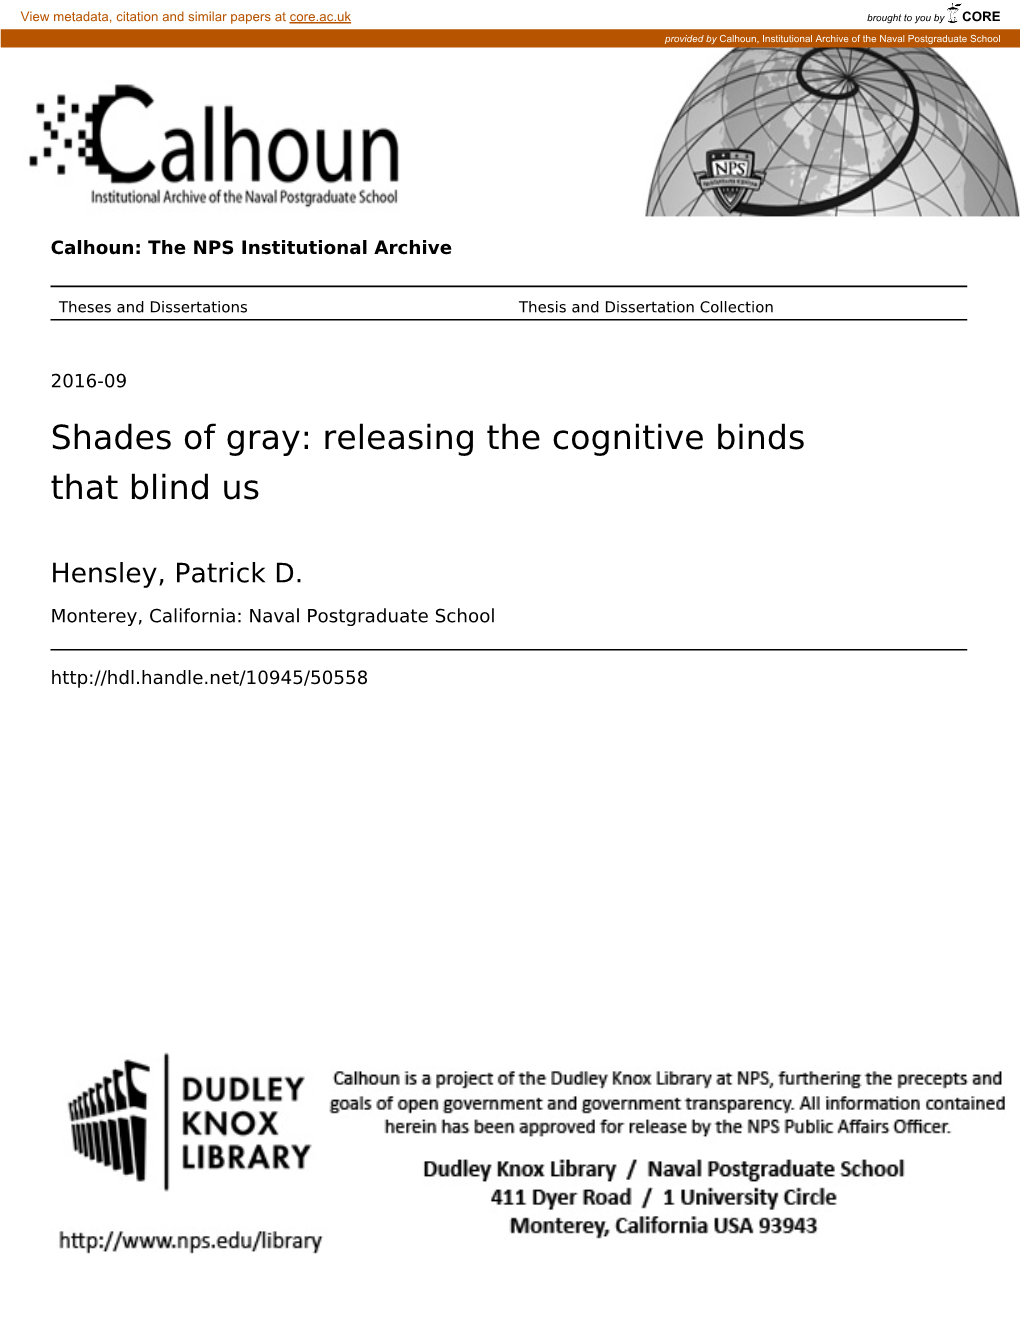 Shades of Gray: Releasing the Cognitive Binds That Blind Us